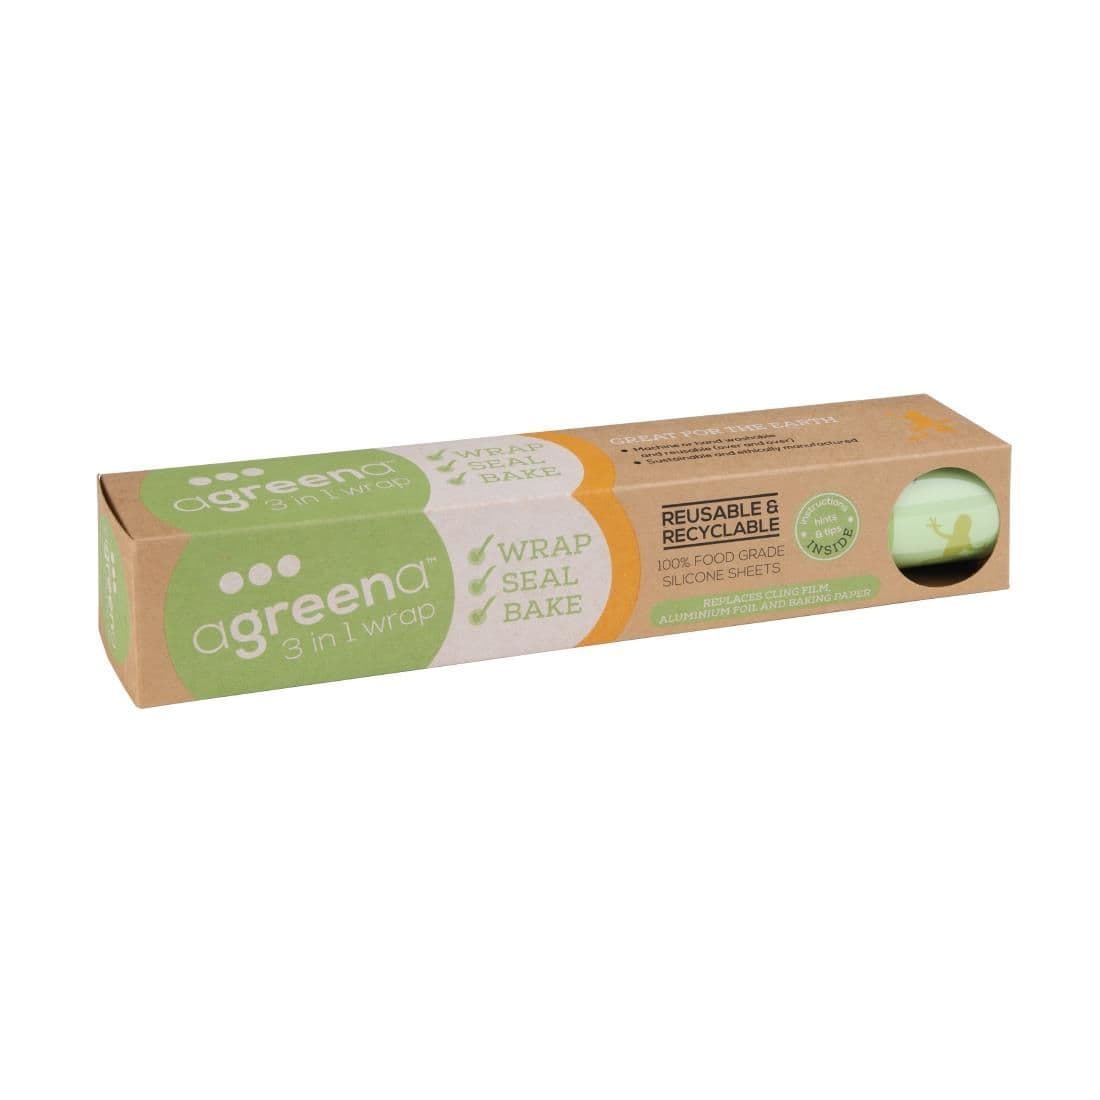 FD935 Agreena Three-In-One Reusable Food Wraps 300 x 450mm (Pack of 2) JD Catering Equipment Solutions Ltd